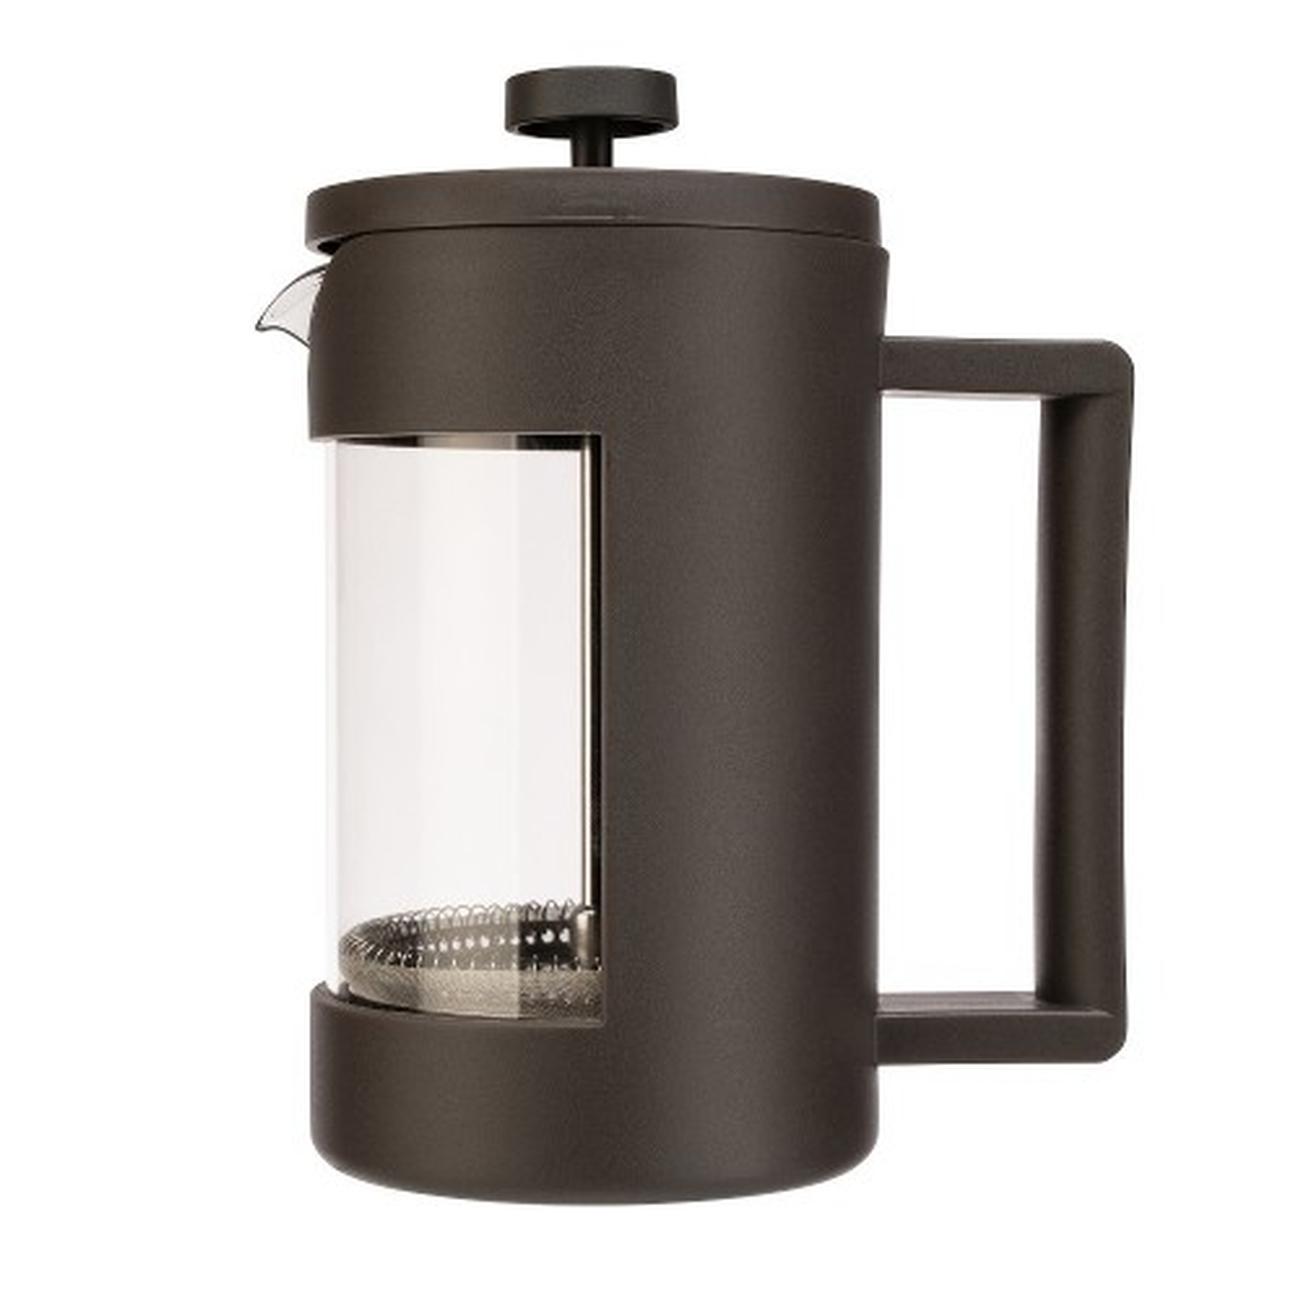 siip-6-cup-cafetiere-black-coffee-maker - Siip Cafetiere 6 Cup-Black